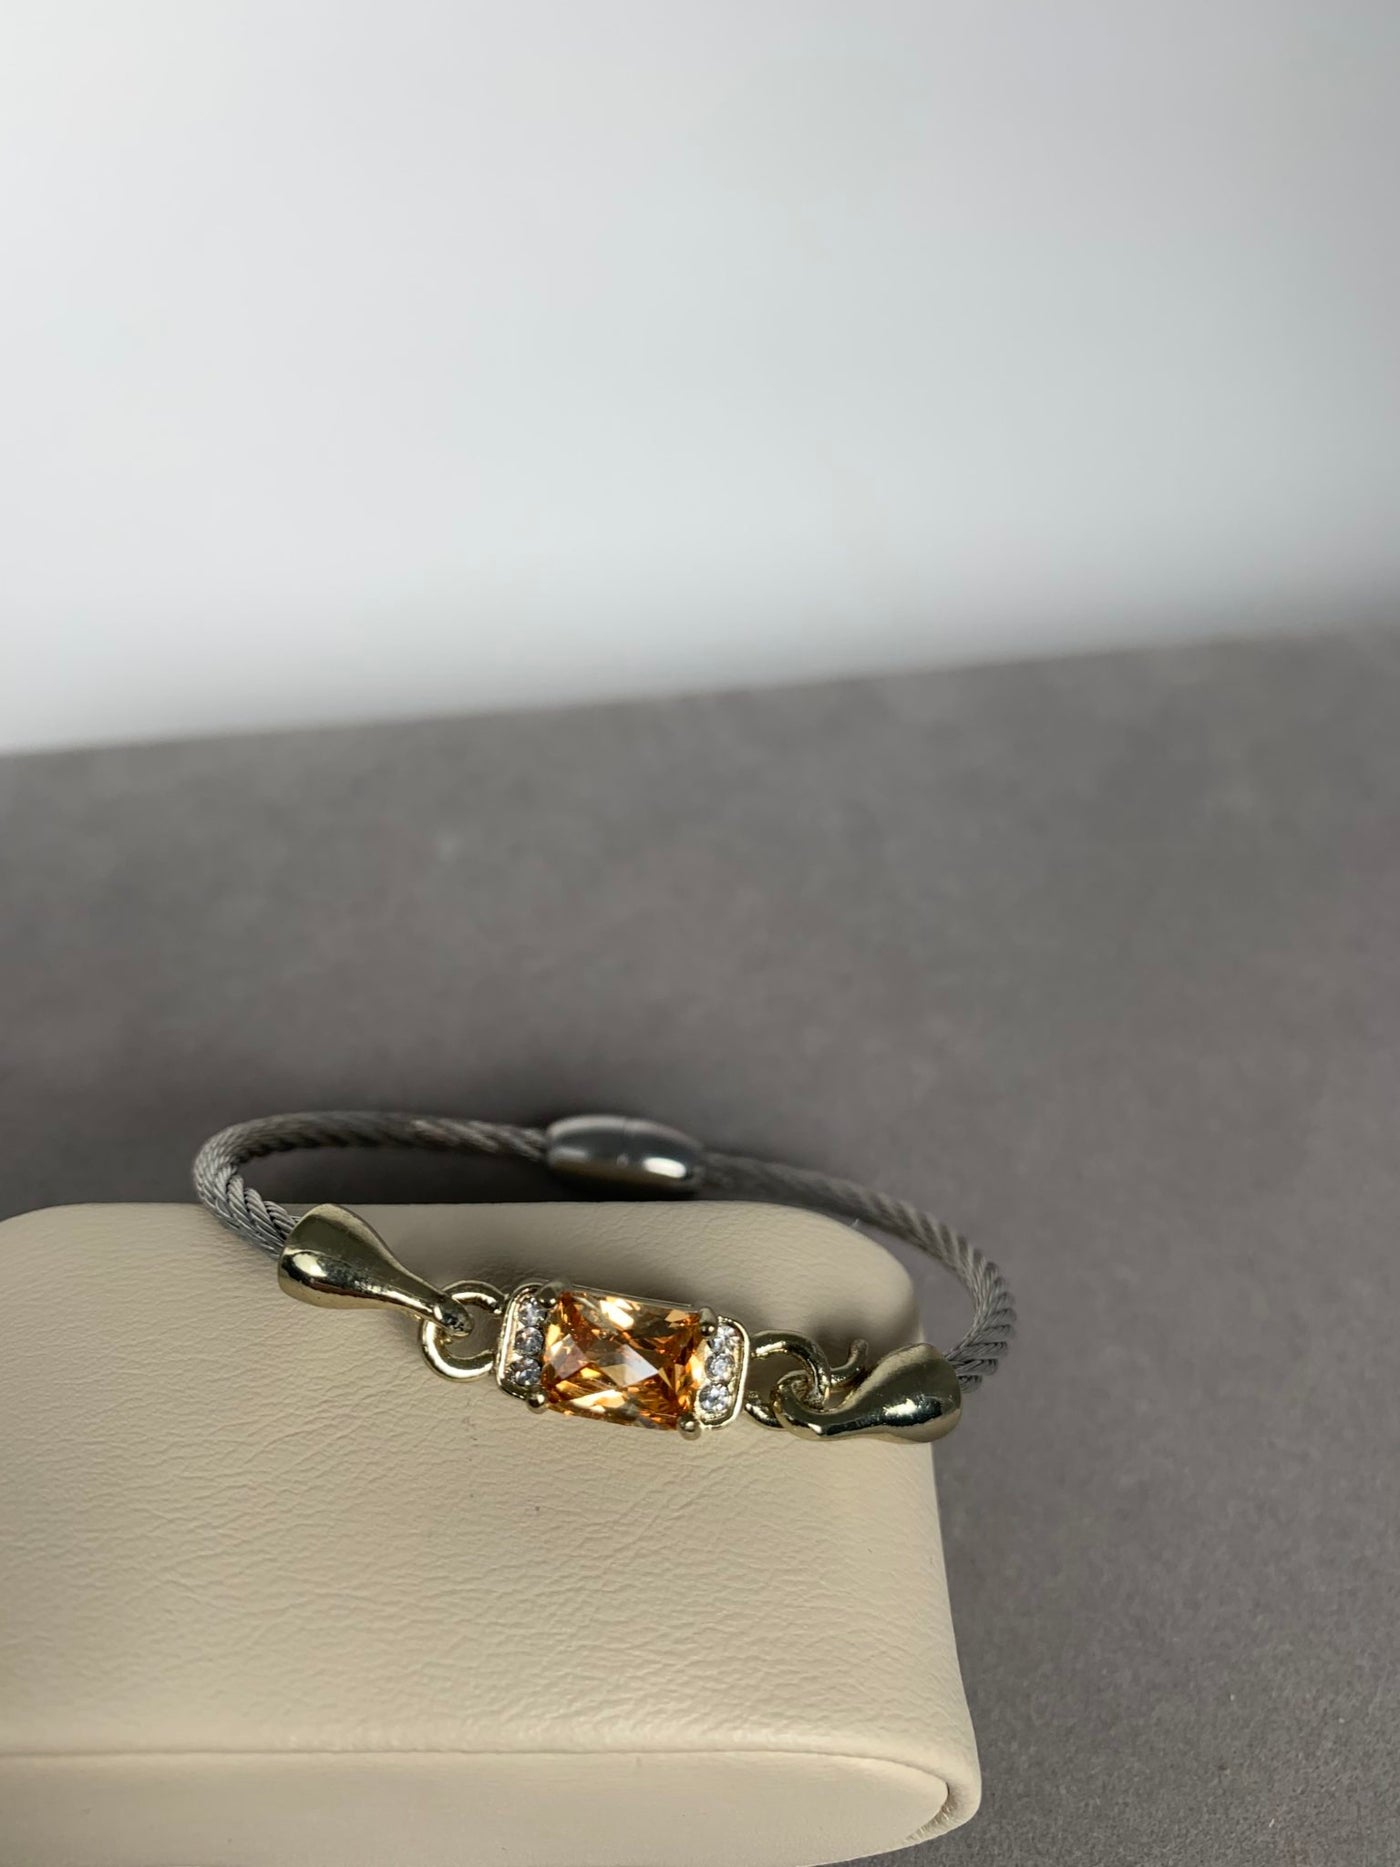 Silver Tone Wire Bangle Bracelet featuring Amber Yellow Crystal